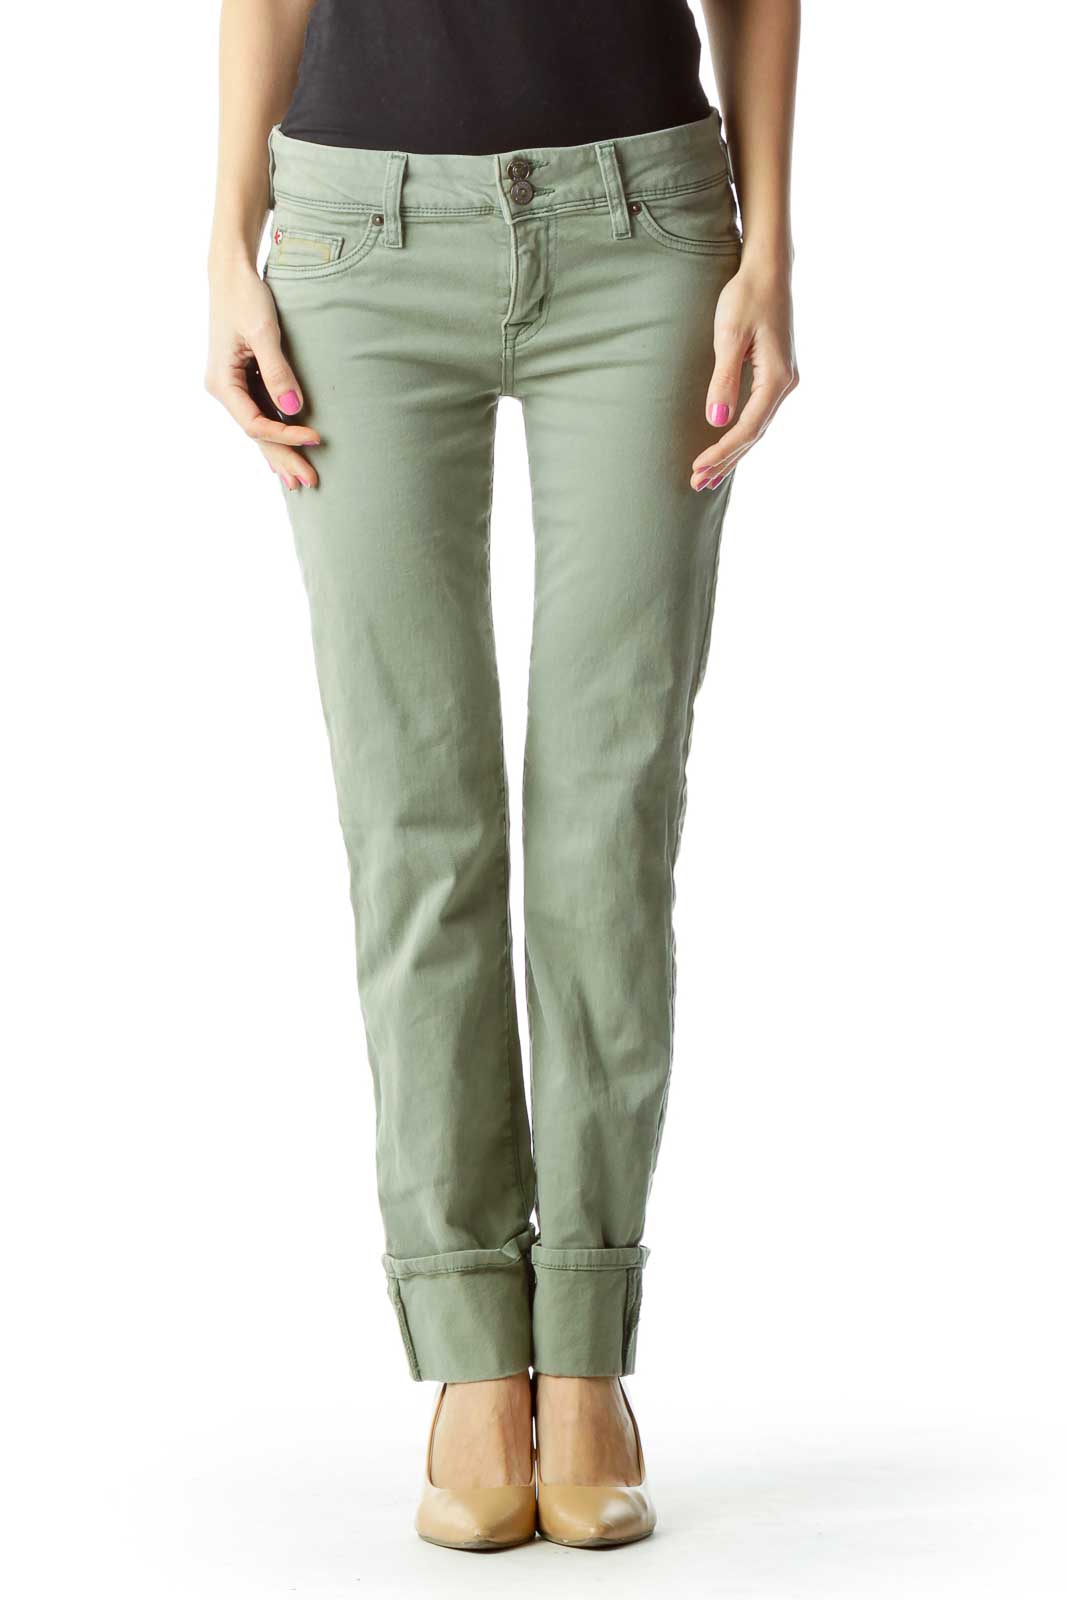 Green Cuffed Skinny Cargo Pants Front